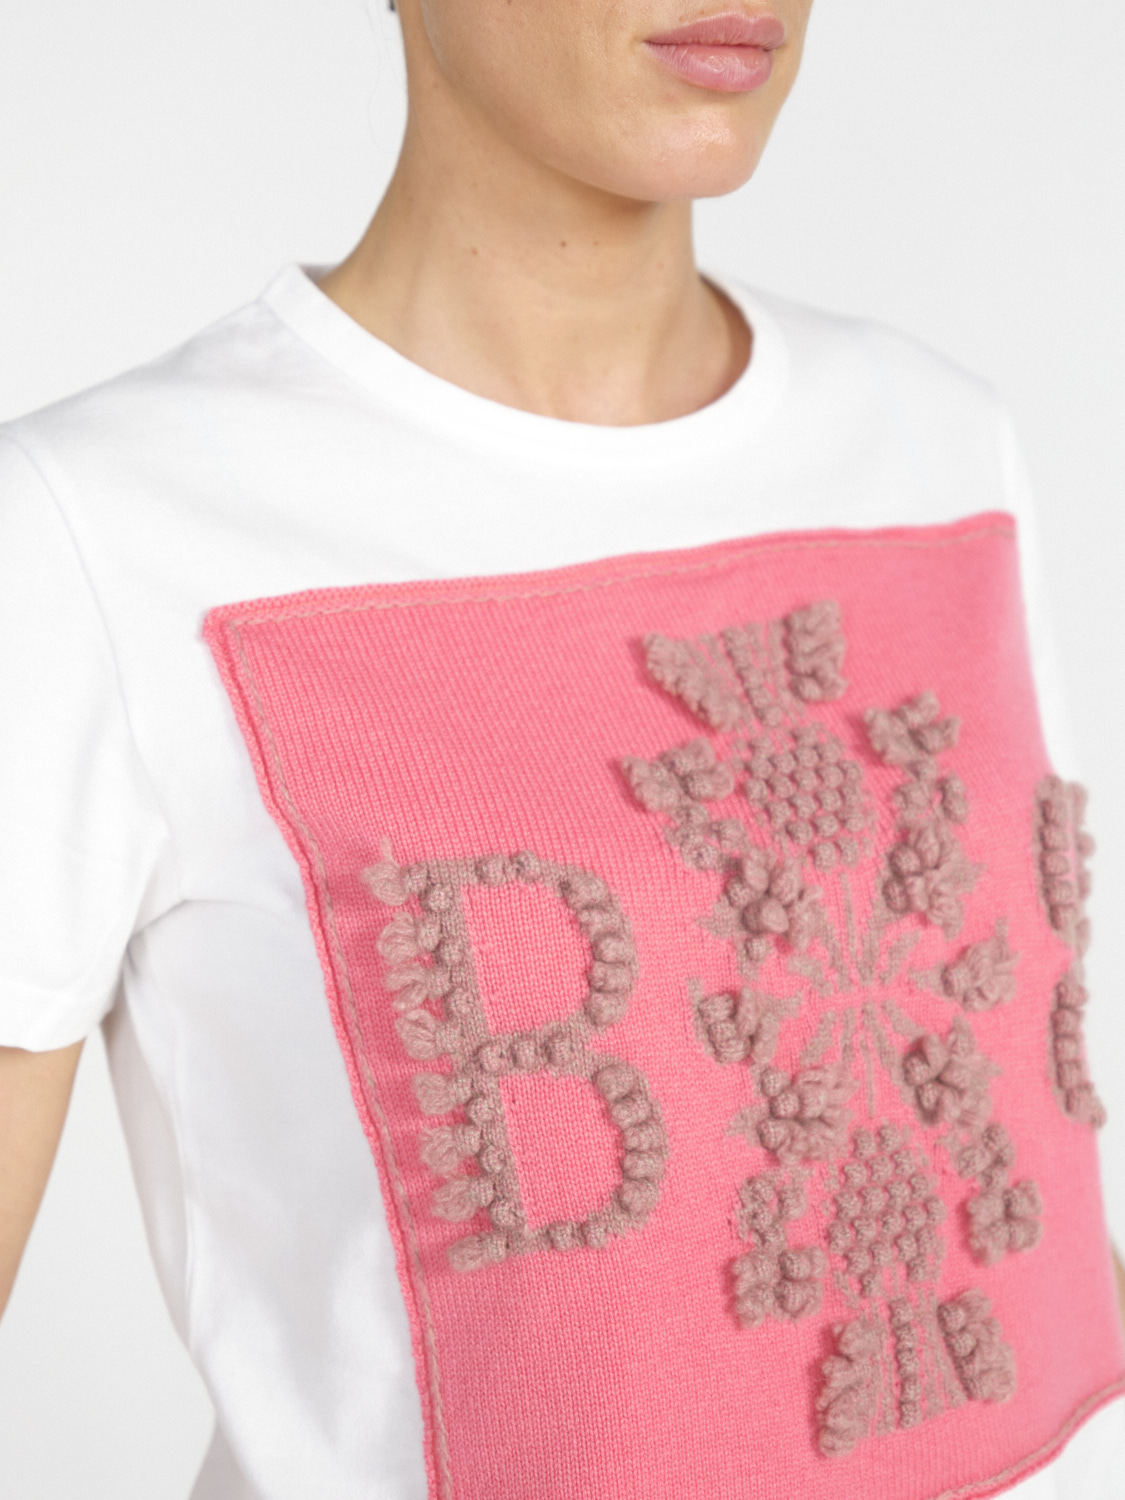 Barrie Thistle Logo Top - T-shirt with cashmere application  coral S